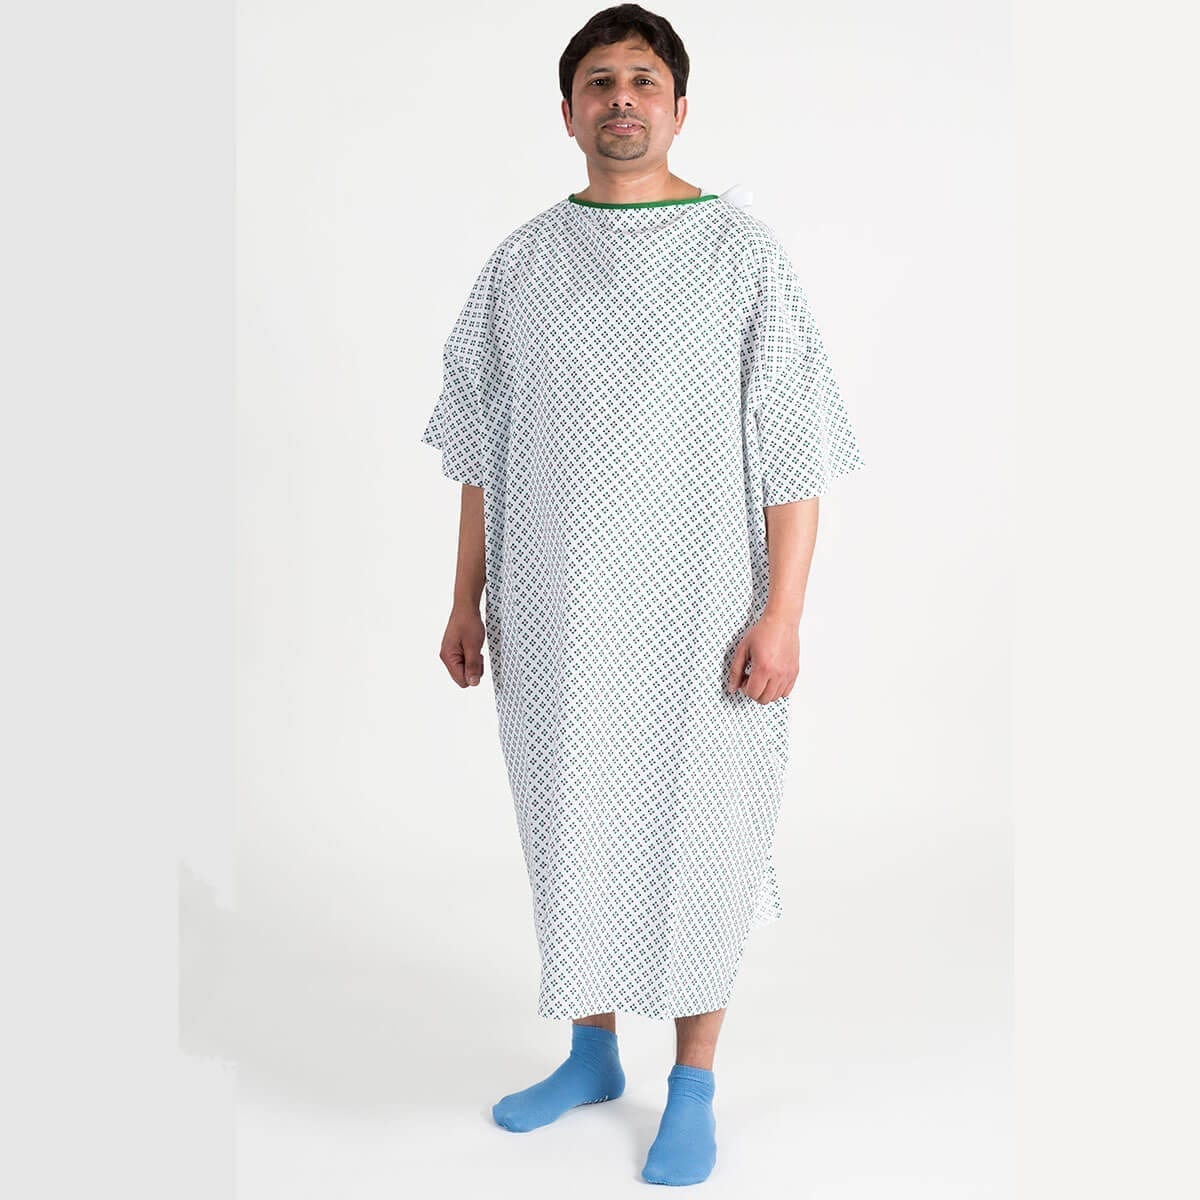 Hospital bariatric 4XL gown - front view